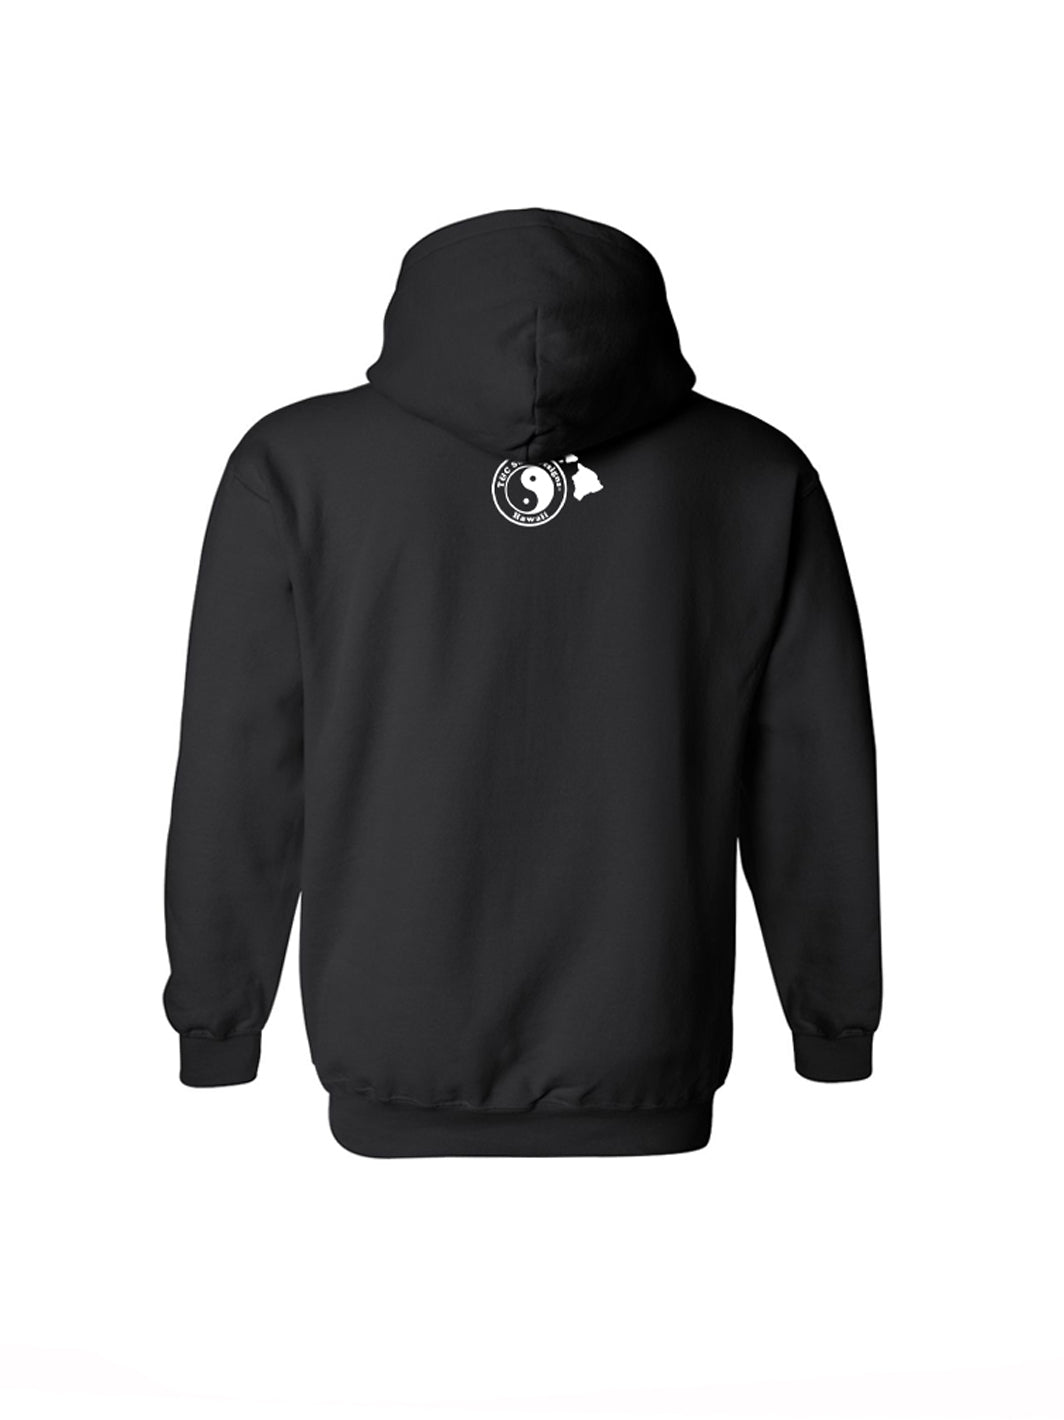 T&C Surf Designs T&C Surf Stay Stoked Hoodie, 